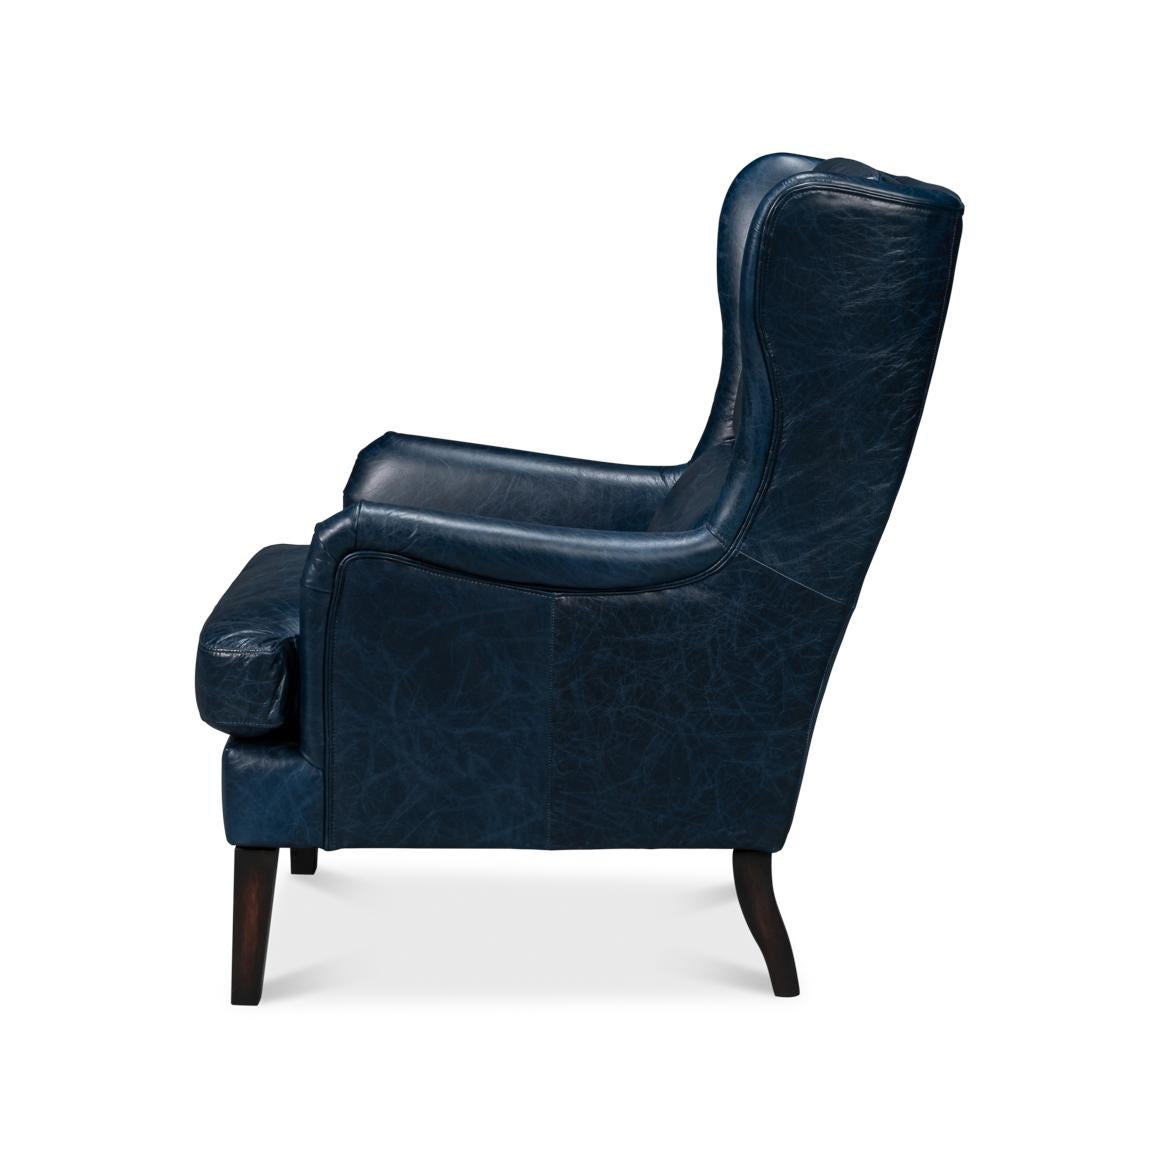 American Classical Classic Wingback Leather Chair Chateau Blue For Sale